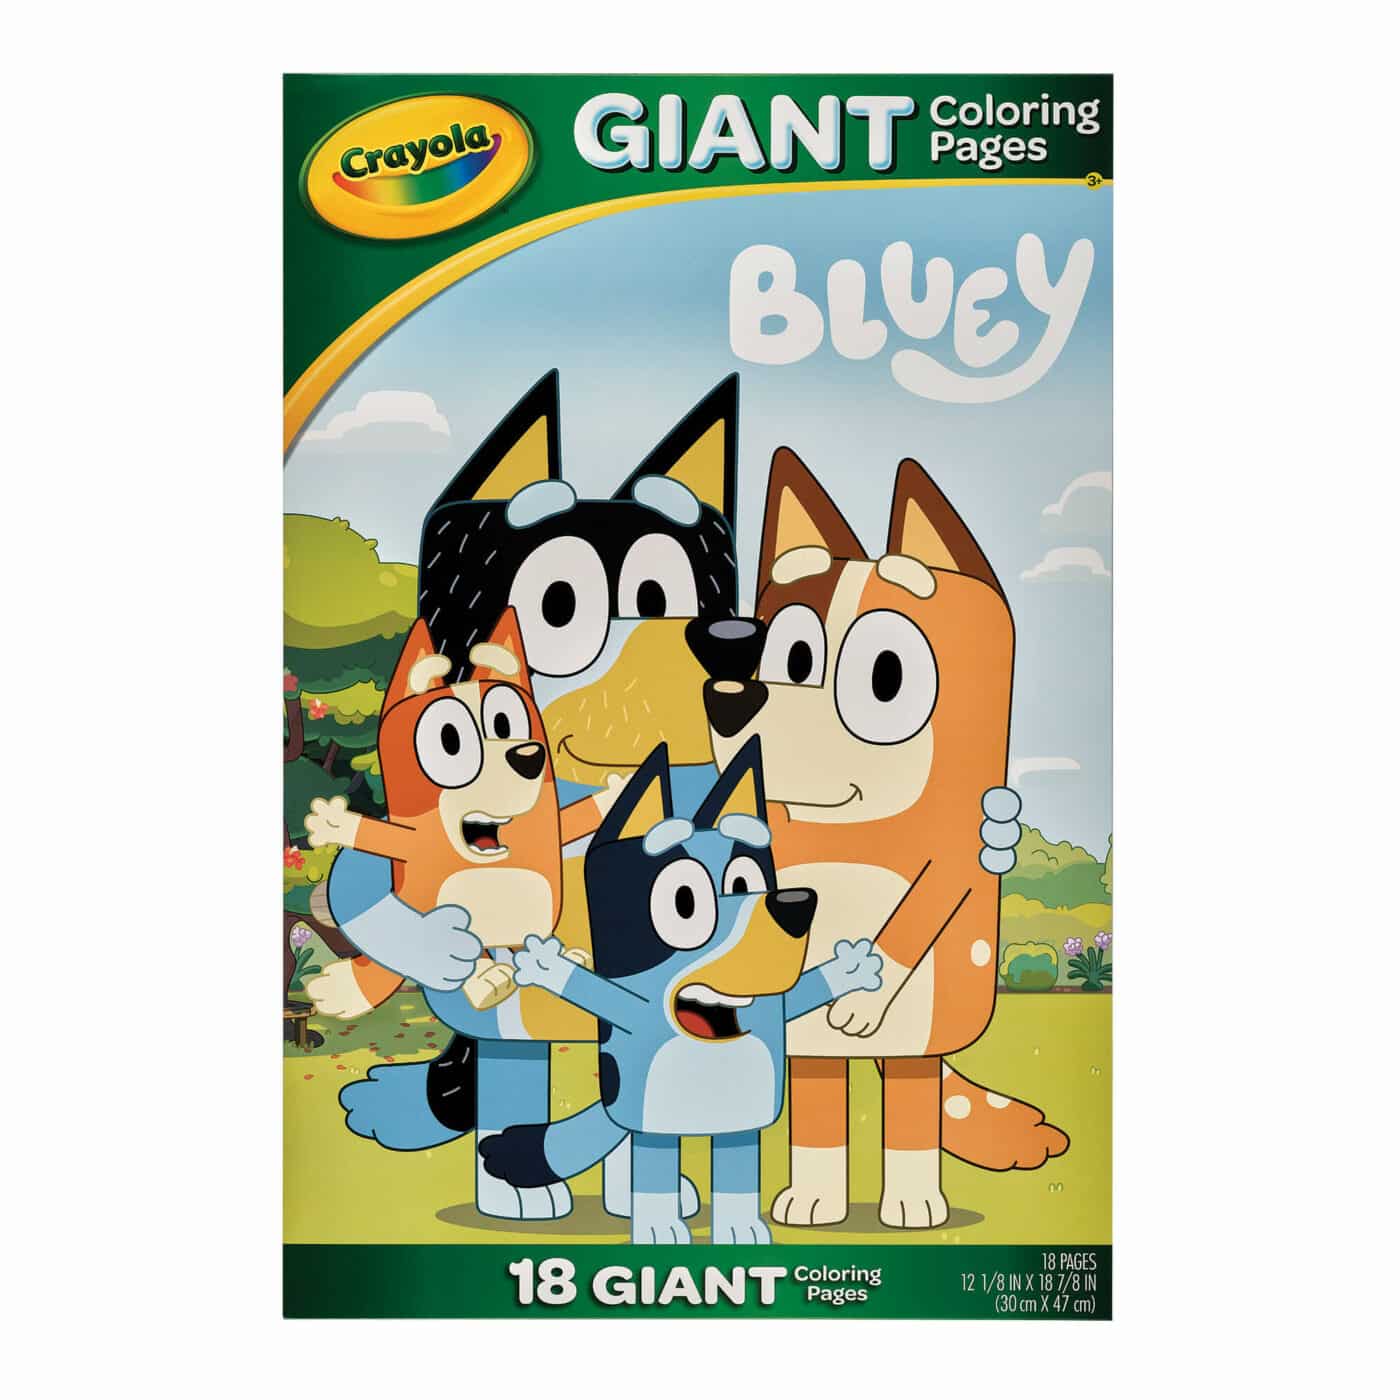 Crayola Giant Colouring Pages - Bluey3